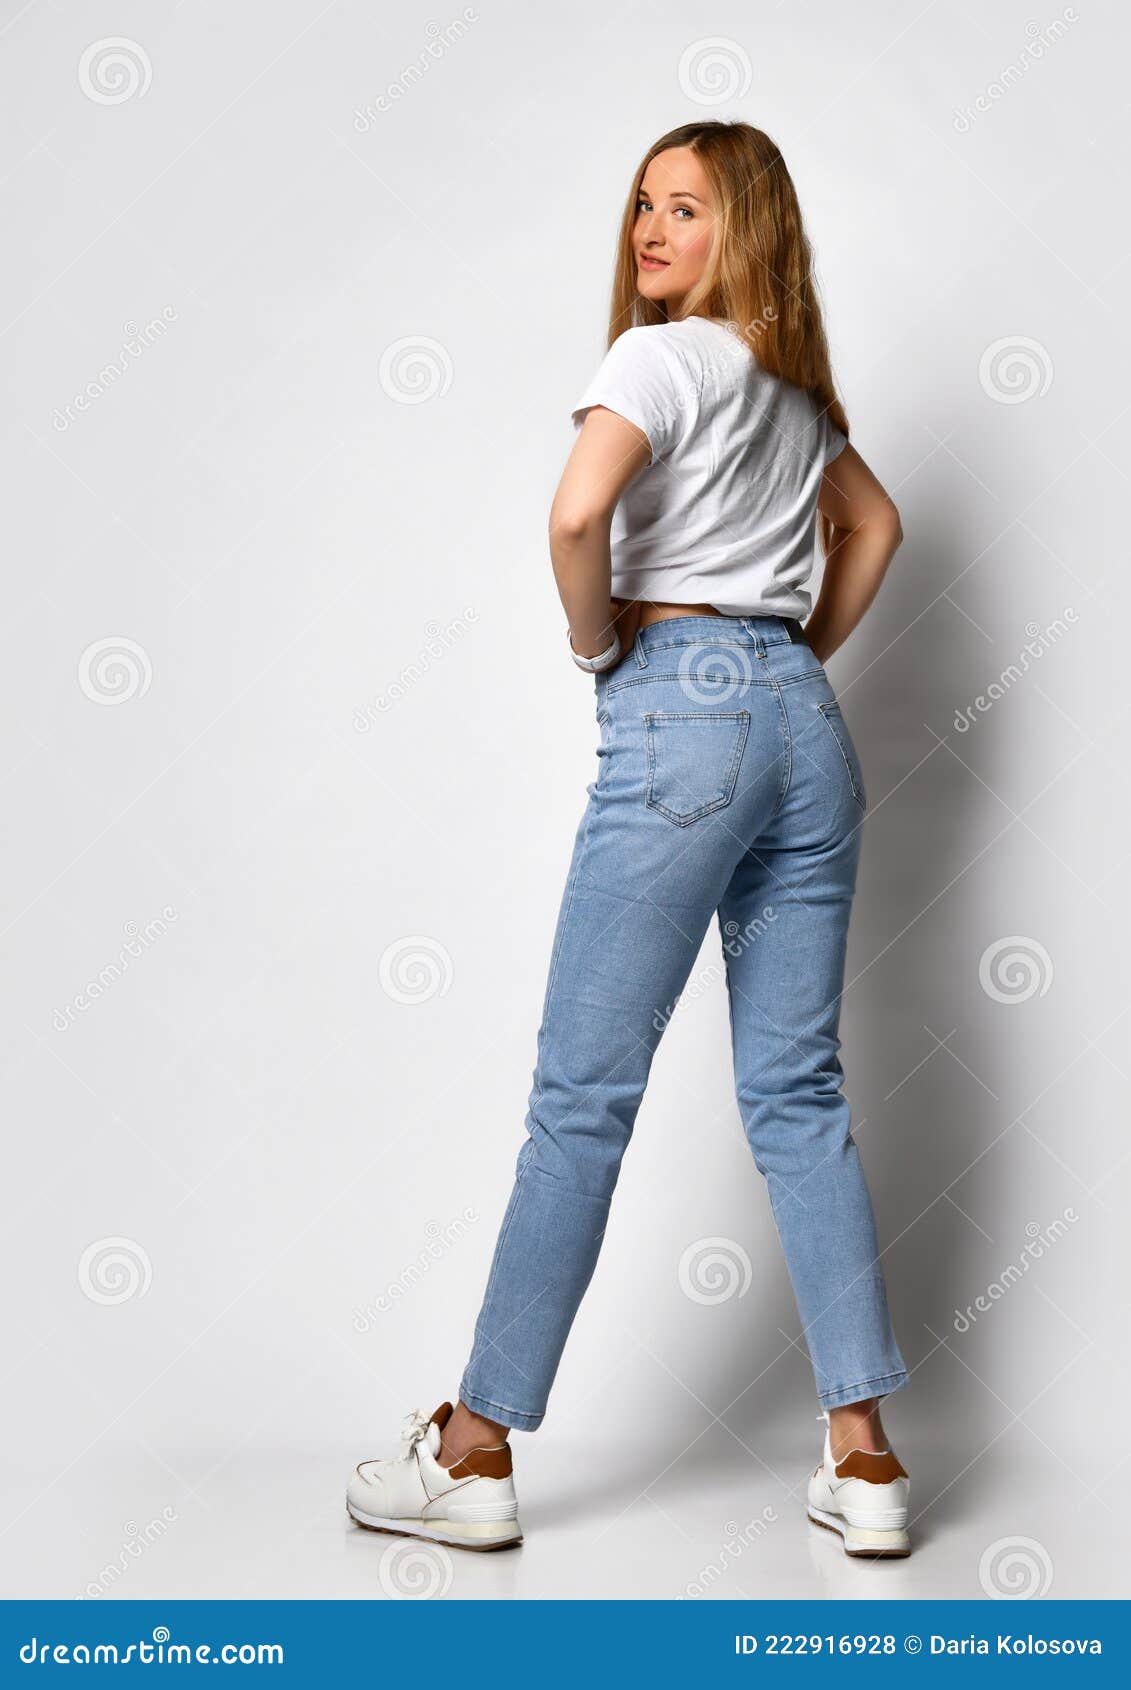 most good legal age teenager butt